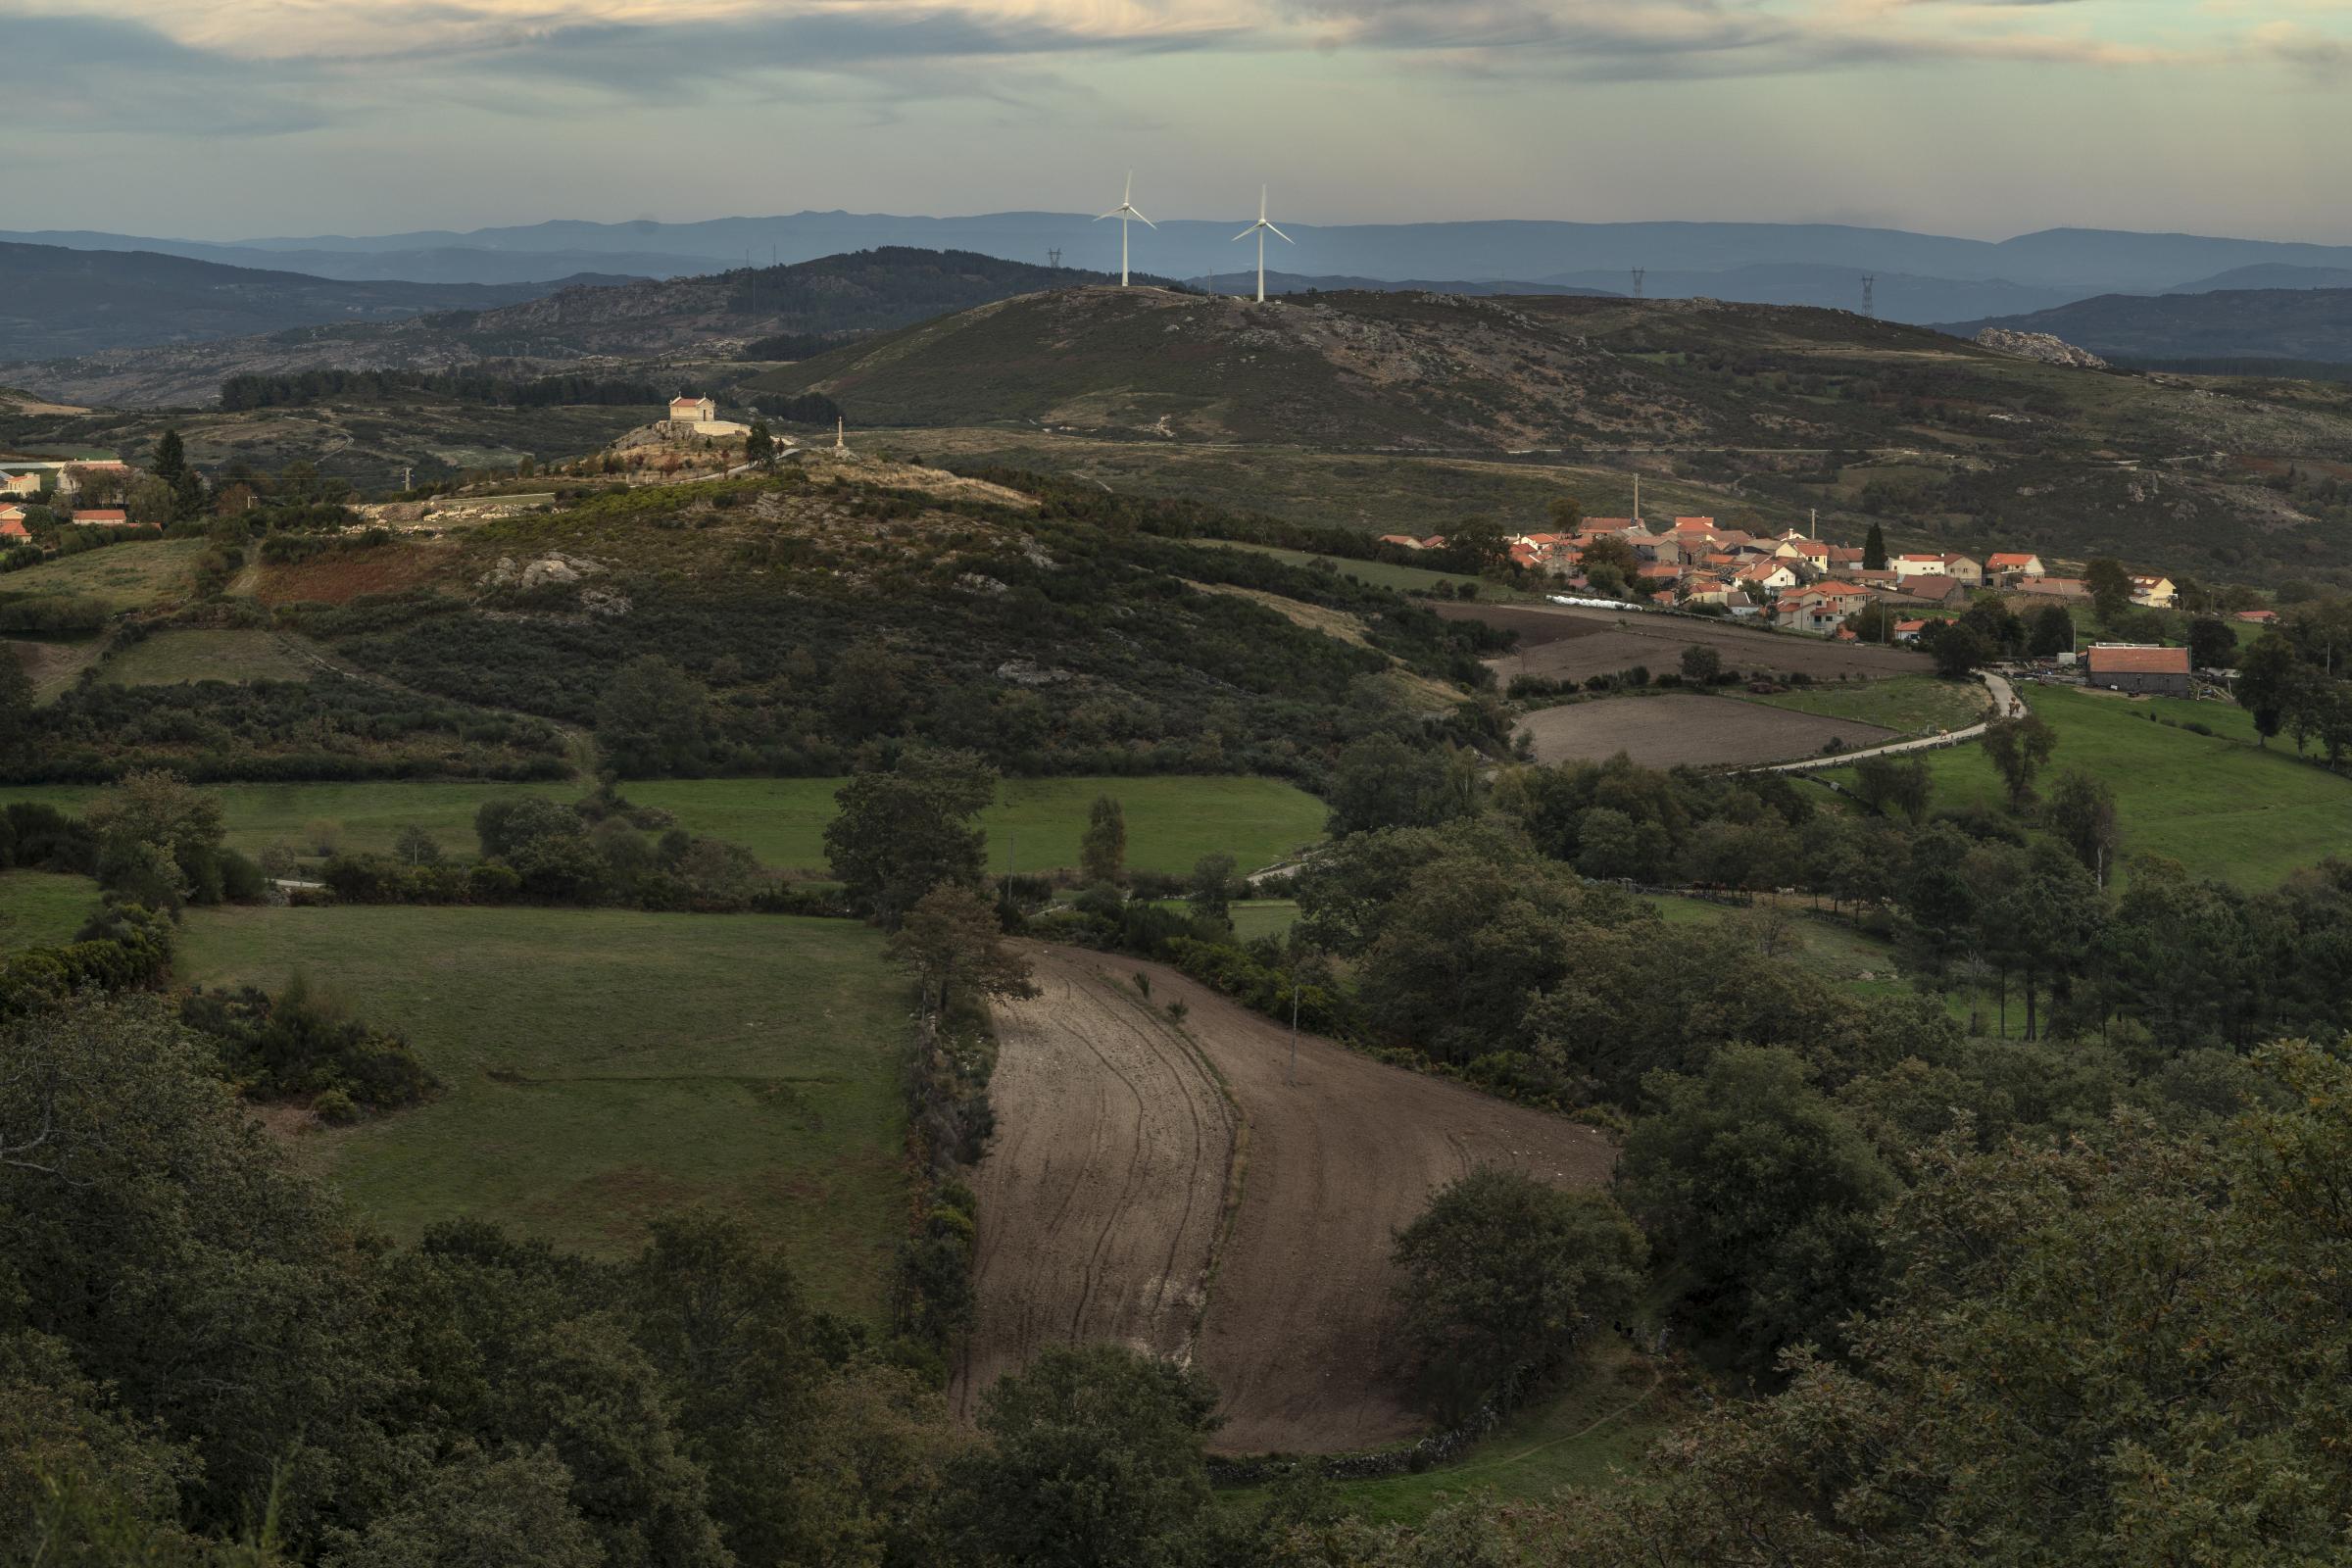 Alturas do Barroso, October 23rd, 2021 - The village of Alturas do Barroso in the mountains of the Barroso region of Portugal. In 2019 the Food and...